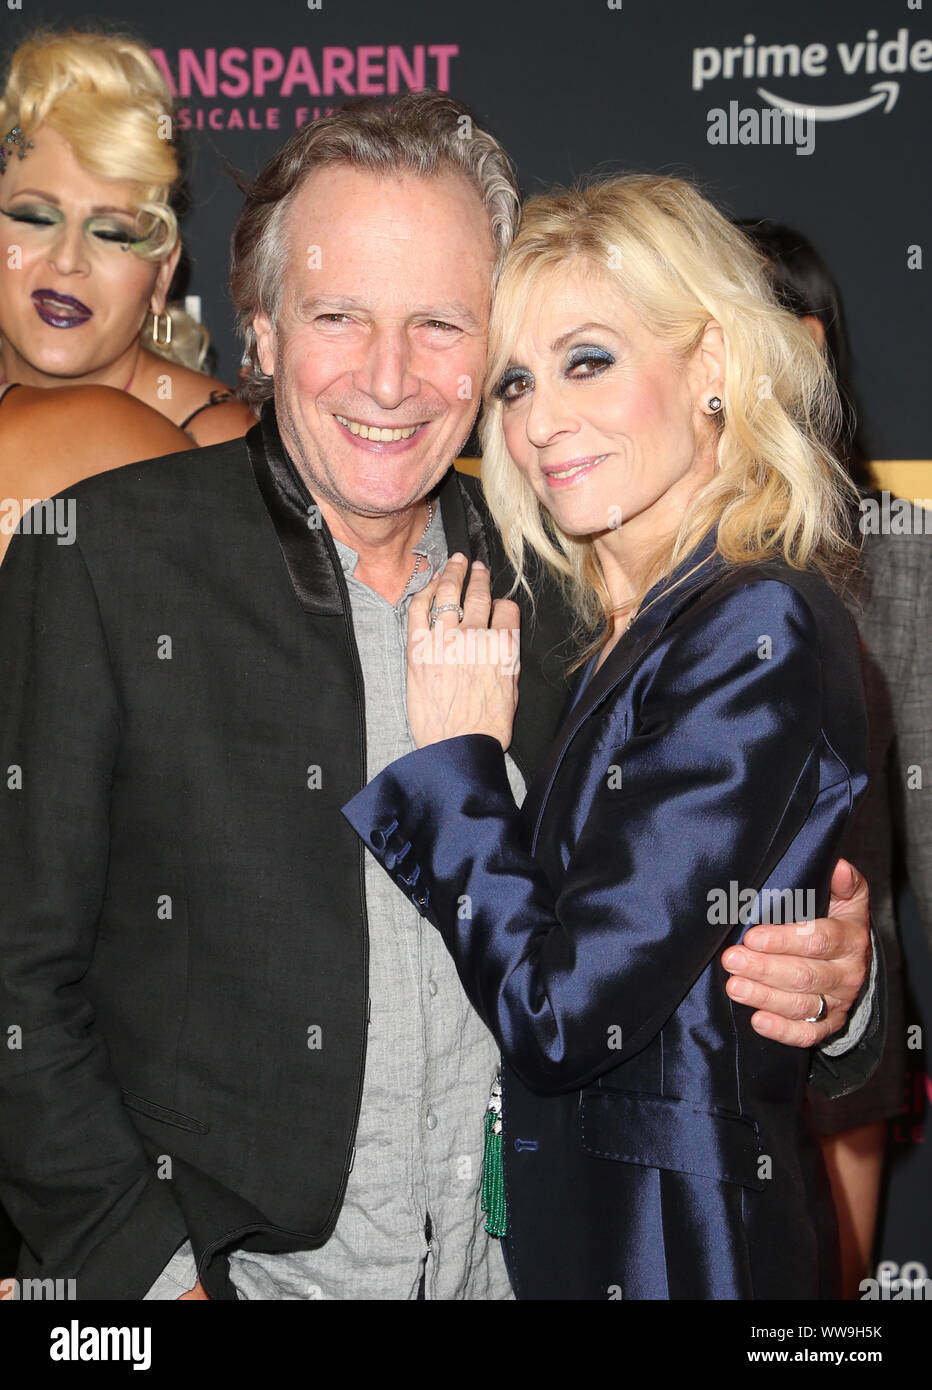 Los Angeles, Ca. 13th Sep, 2019. Judith Light, Robert Desiderio, at LA Premiere Of Amazon's 'Transparent Musicale Finale' at Regal Cinemas L.A. Live in Los Angeles, California on September 13, 2019. Credit: Faye Sadou/Media Punch/Alamy Live News Stock Photo